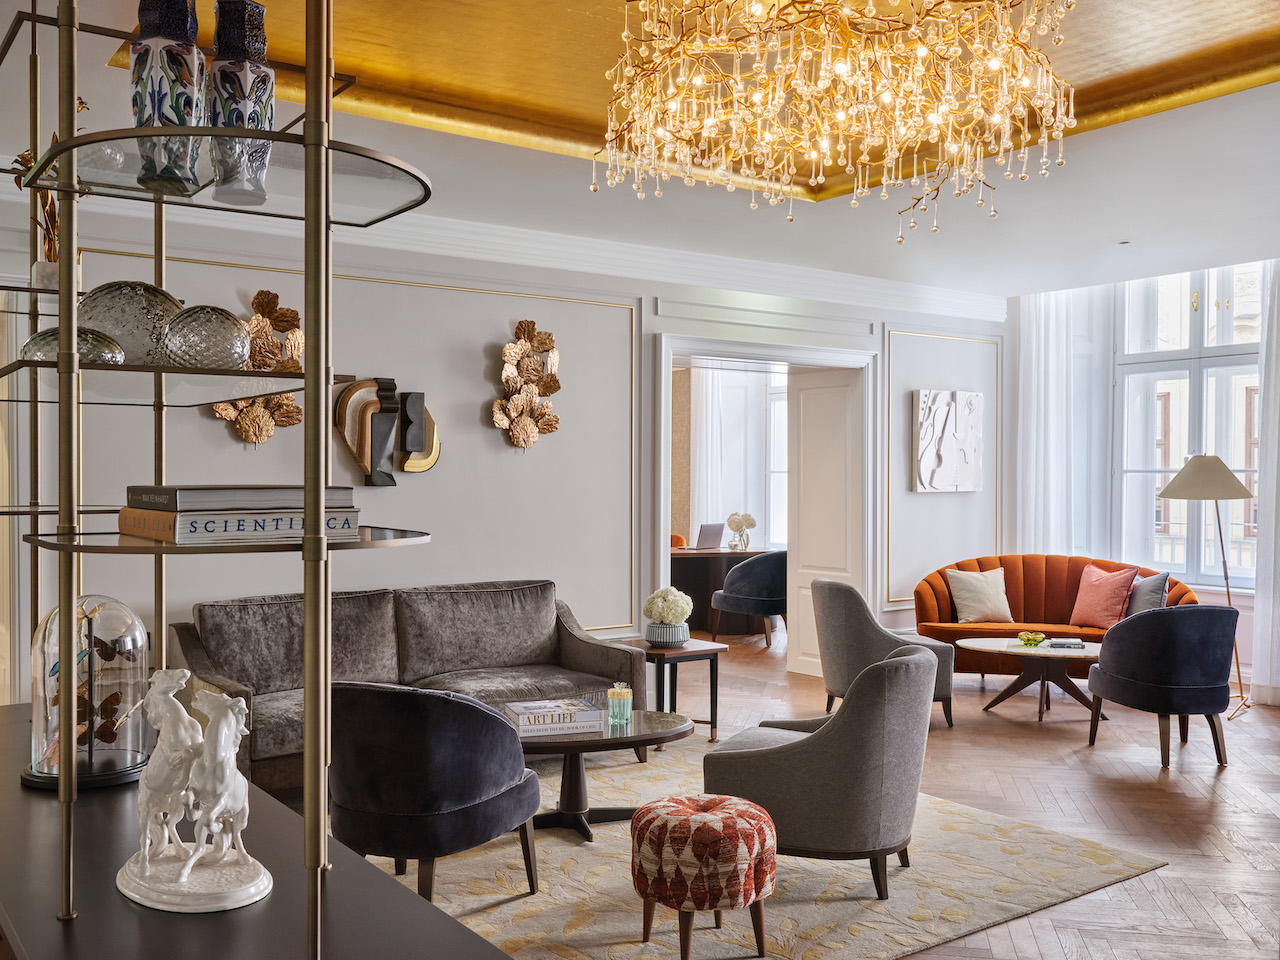 The luxurious Rosewood Vienna has opened on Petersplatz, one of the city's most famous squares.